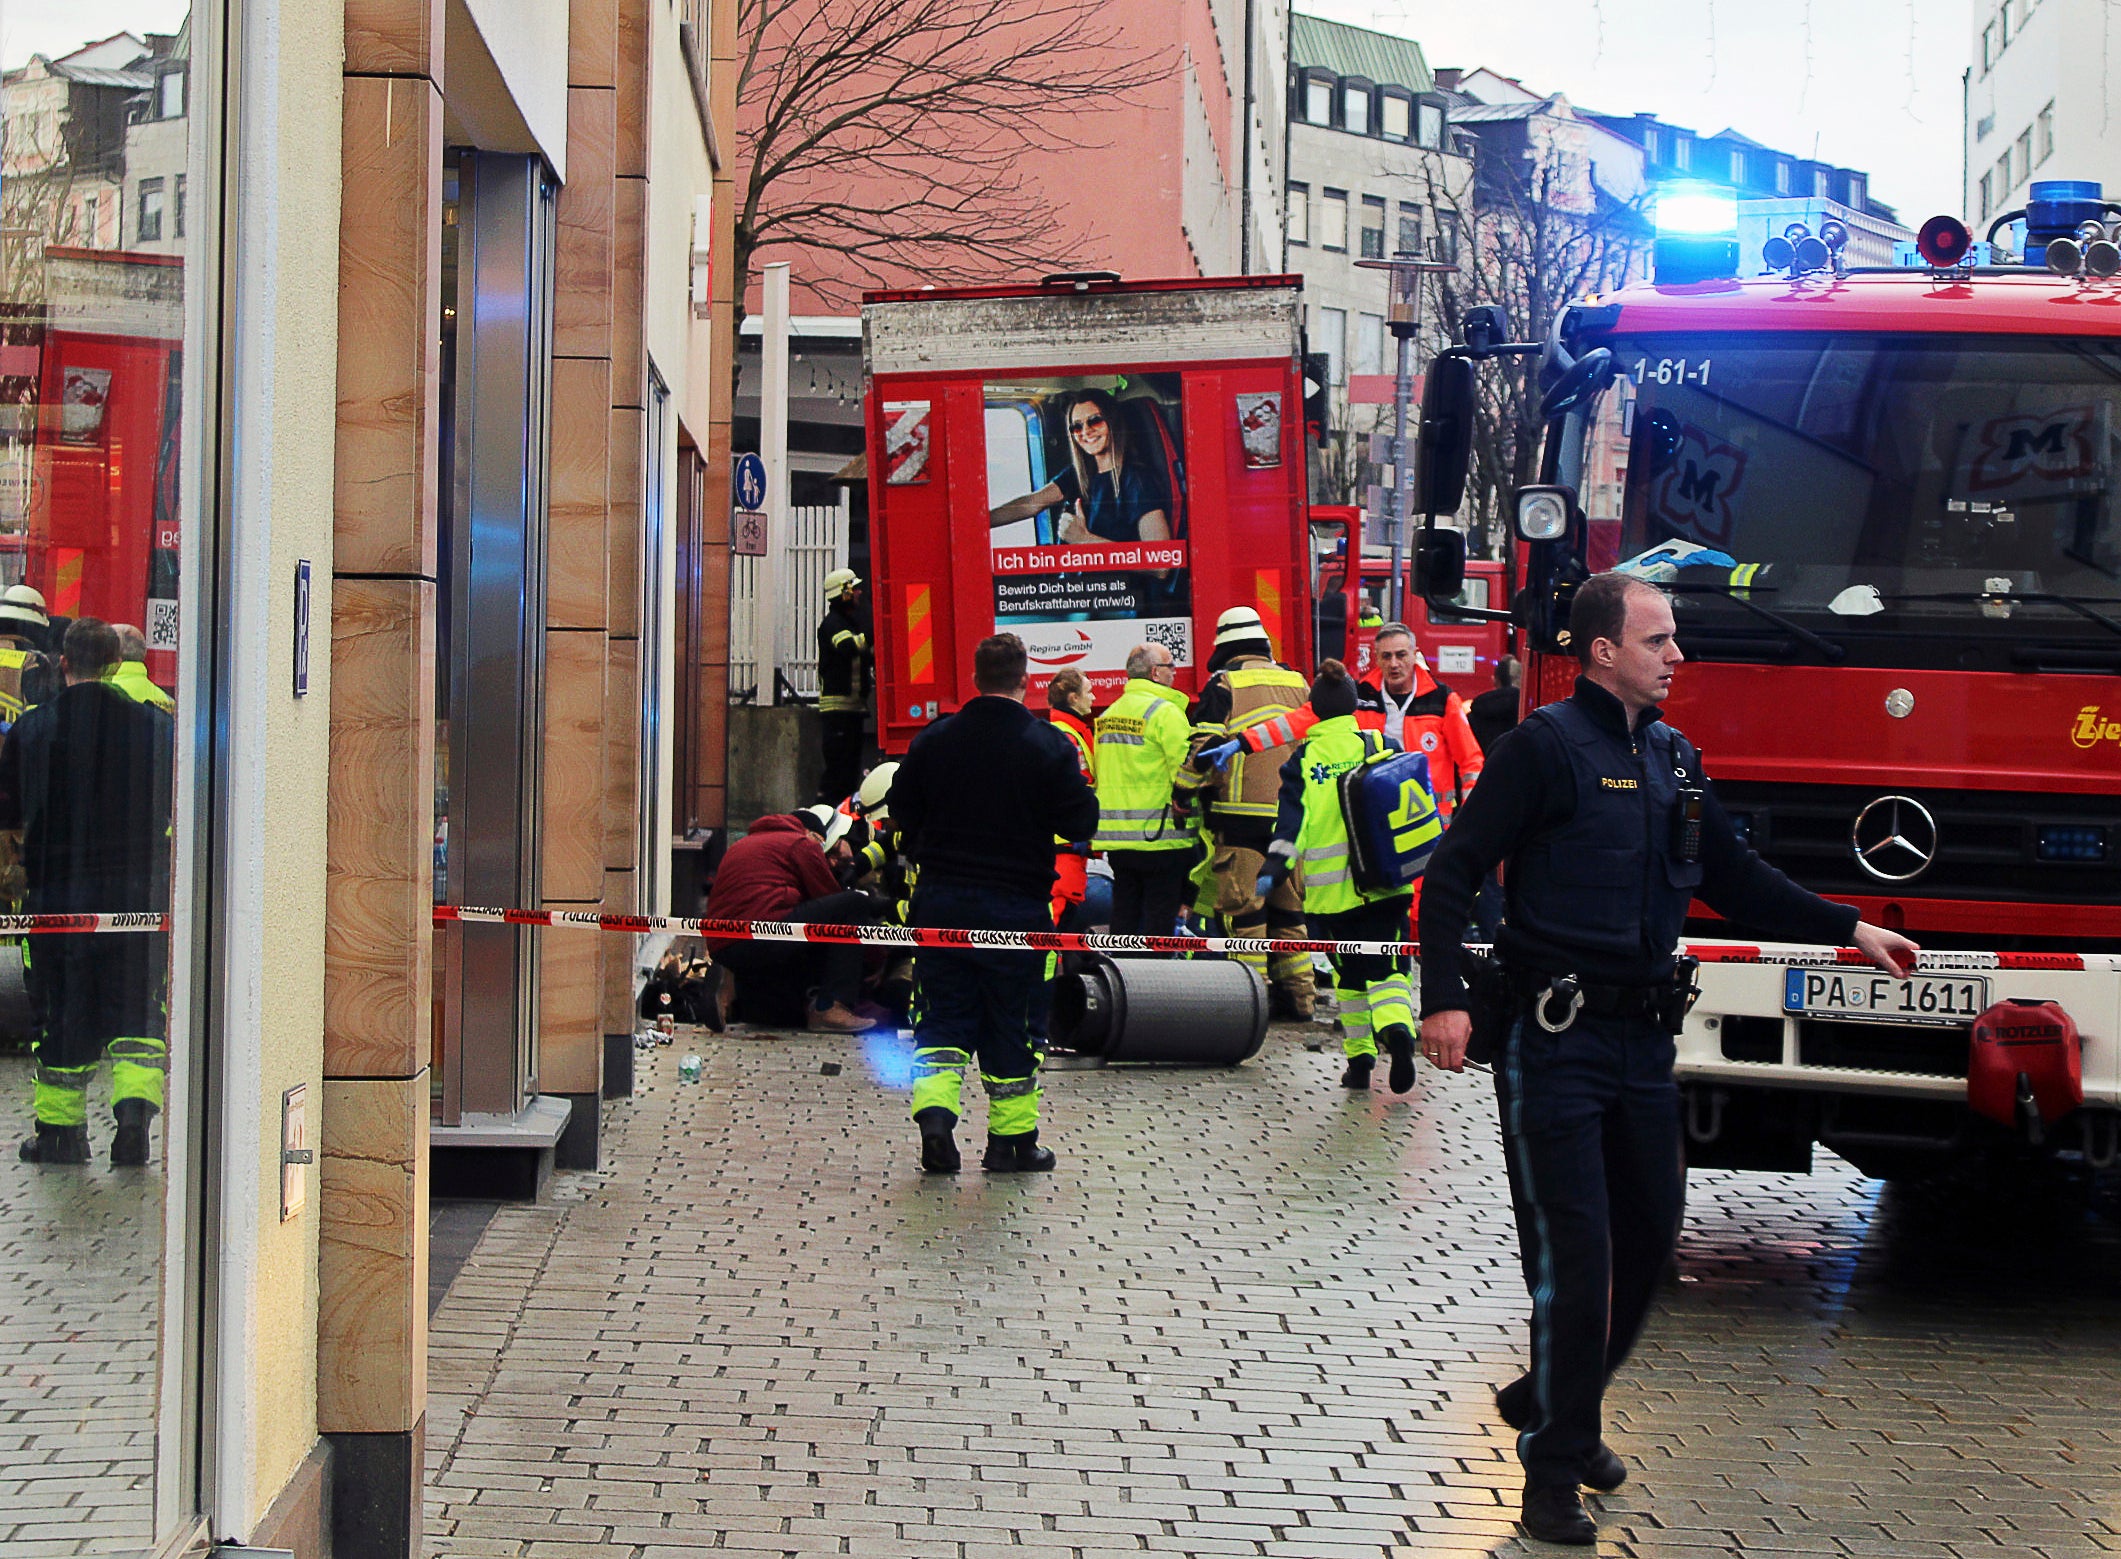 Fire and rescue services stand at the scene of a car accident in the city center in Passau